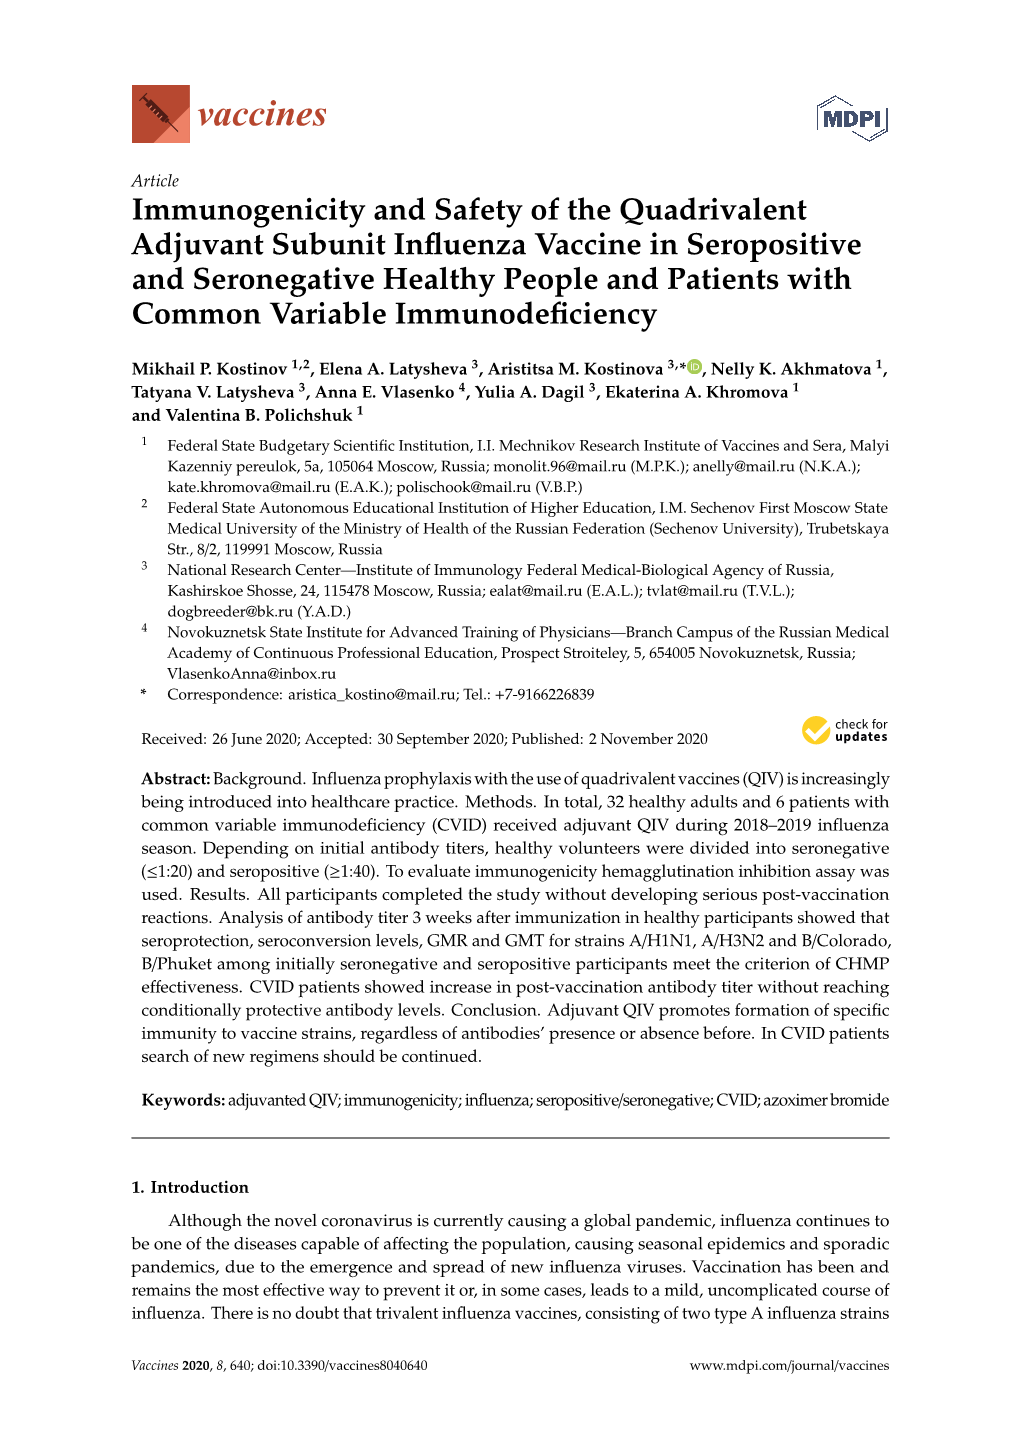 Immunogenicity and Safety of the Quadrivalent Adjuvant Subunit Influenza Vaccine in Seropositive and Seronegative Healthy People